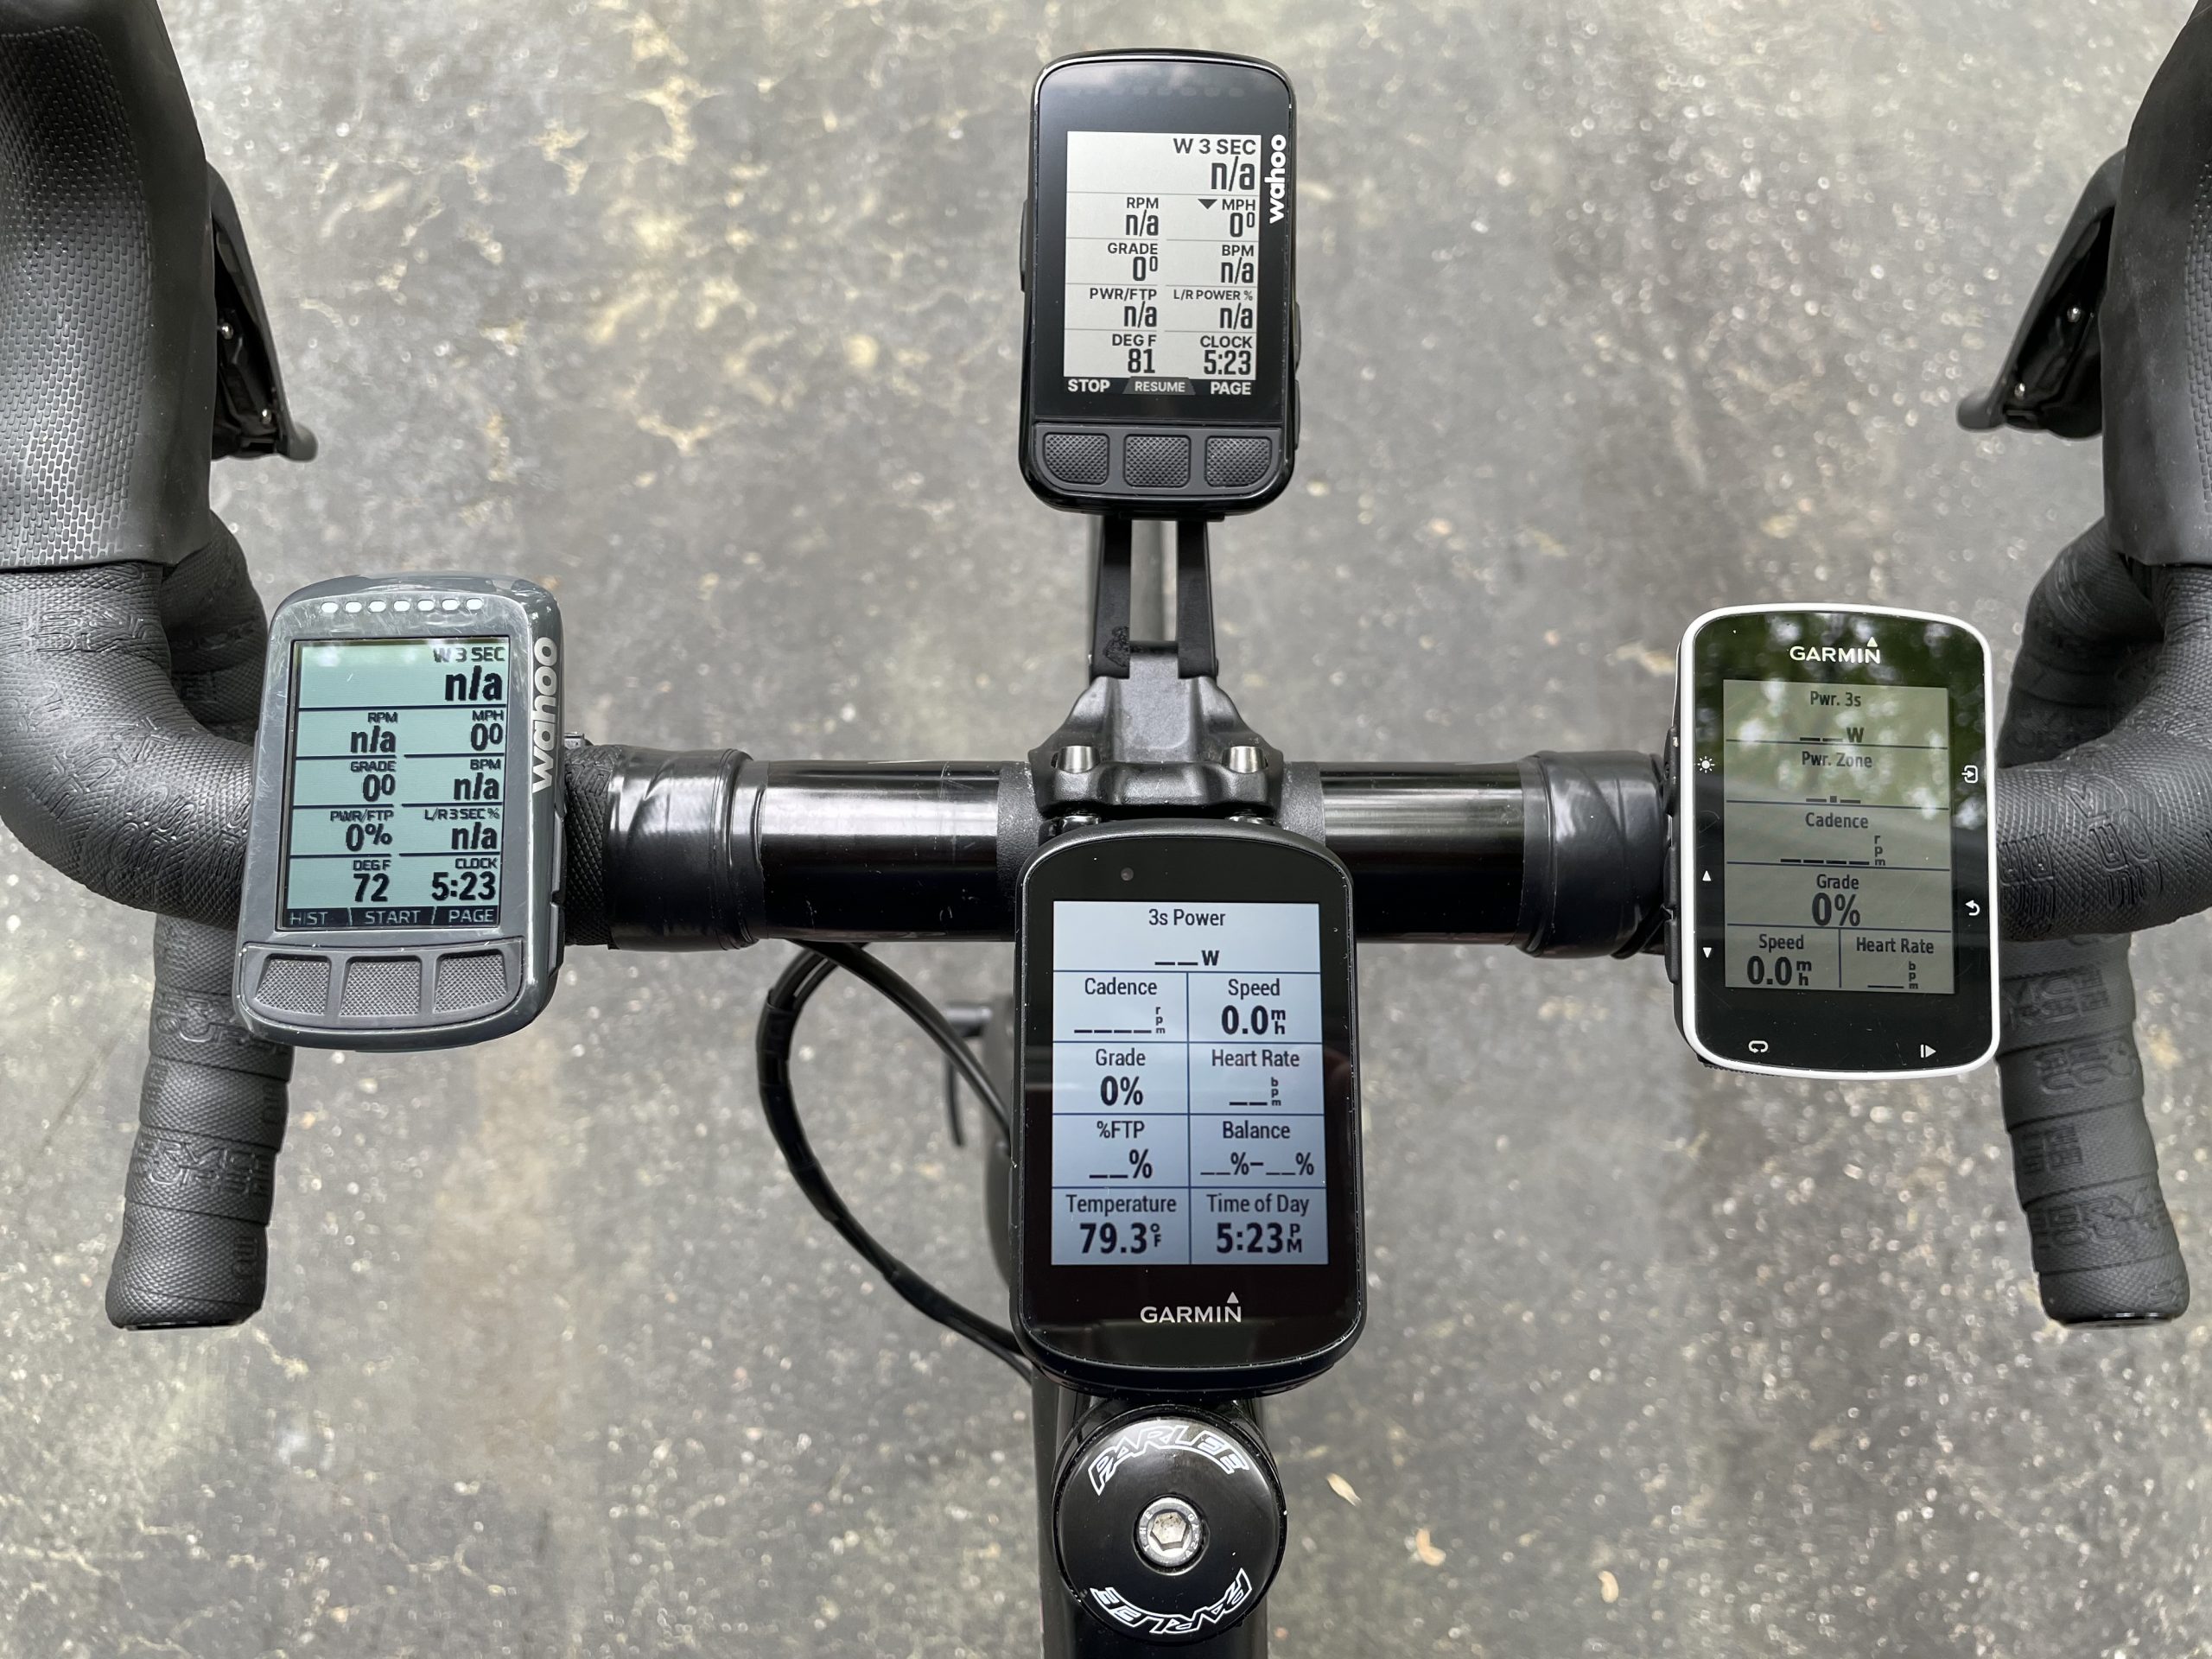 kontroversiel Deltage komplet WHY I SWITCHED TO THE WAHOO ELEMNT BOLT - In The Know Cycling